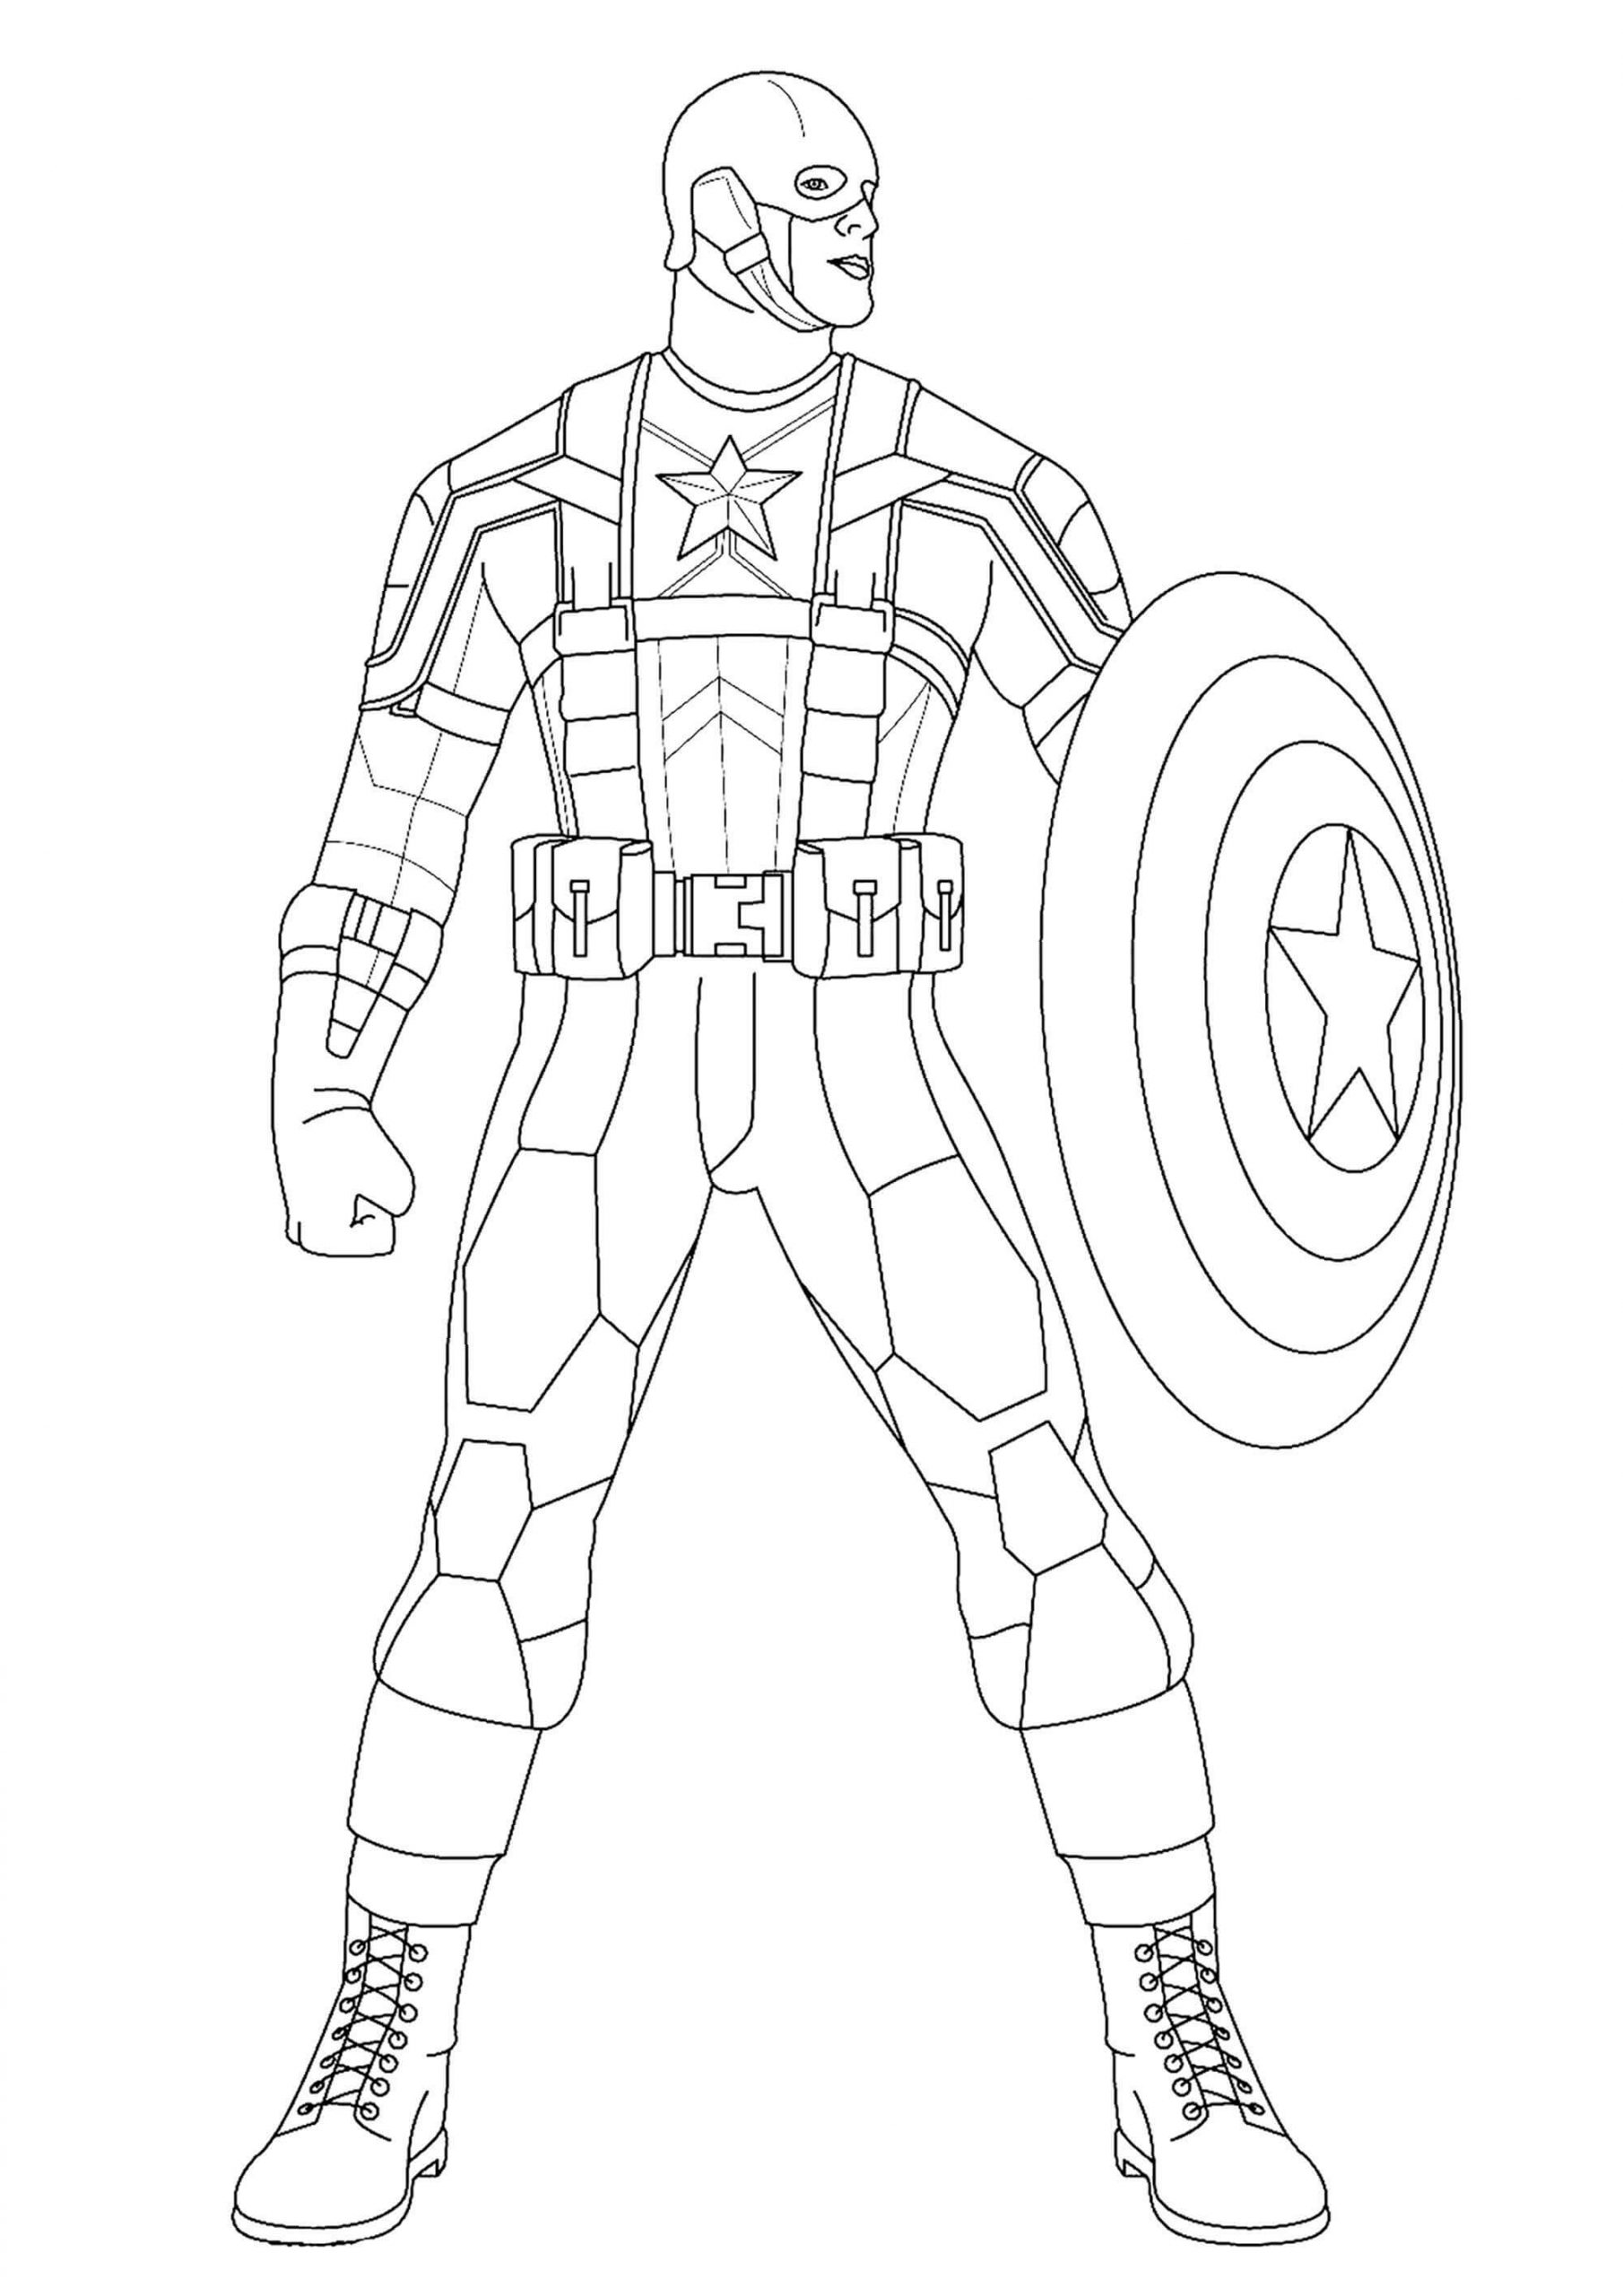 Incroyable Captain America coloring page